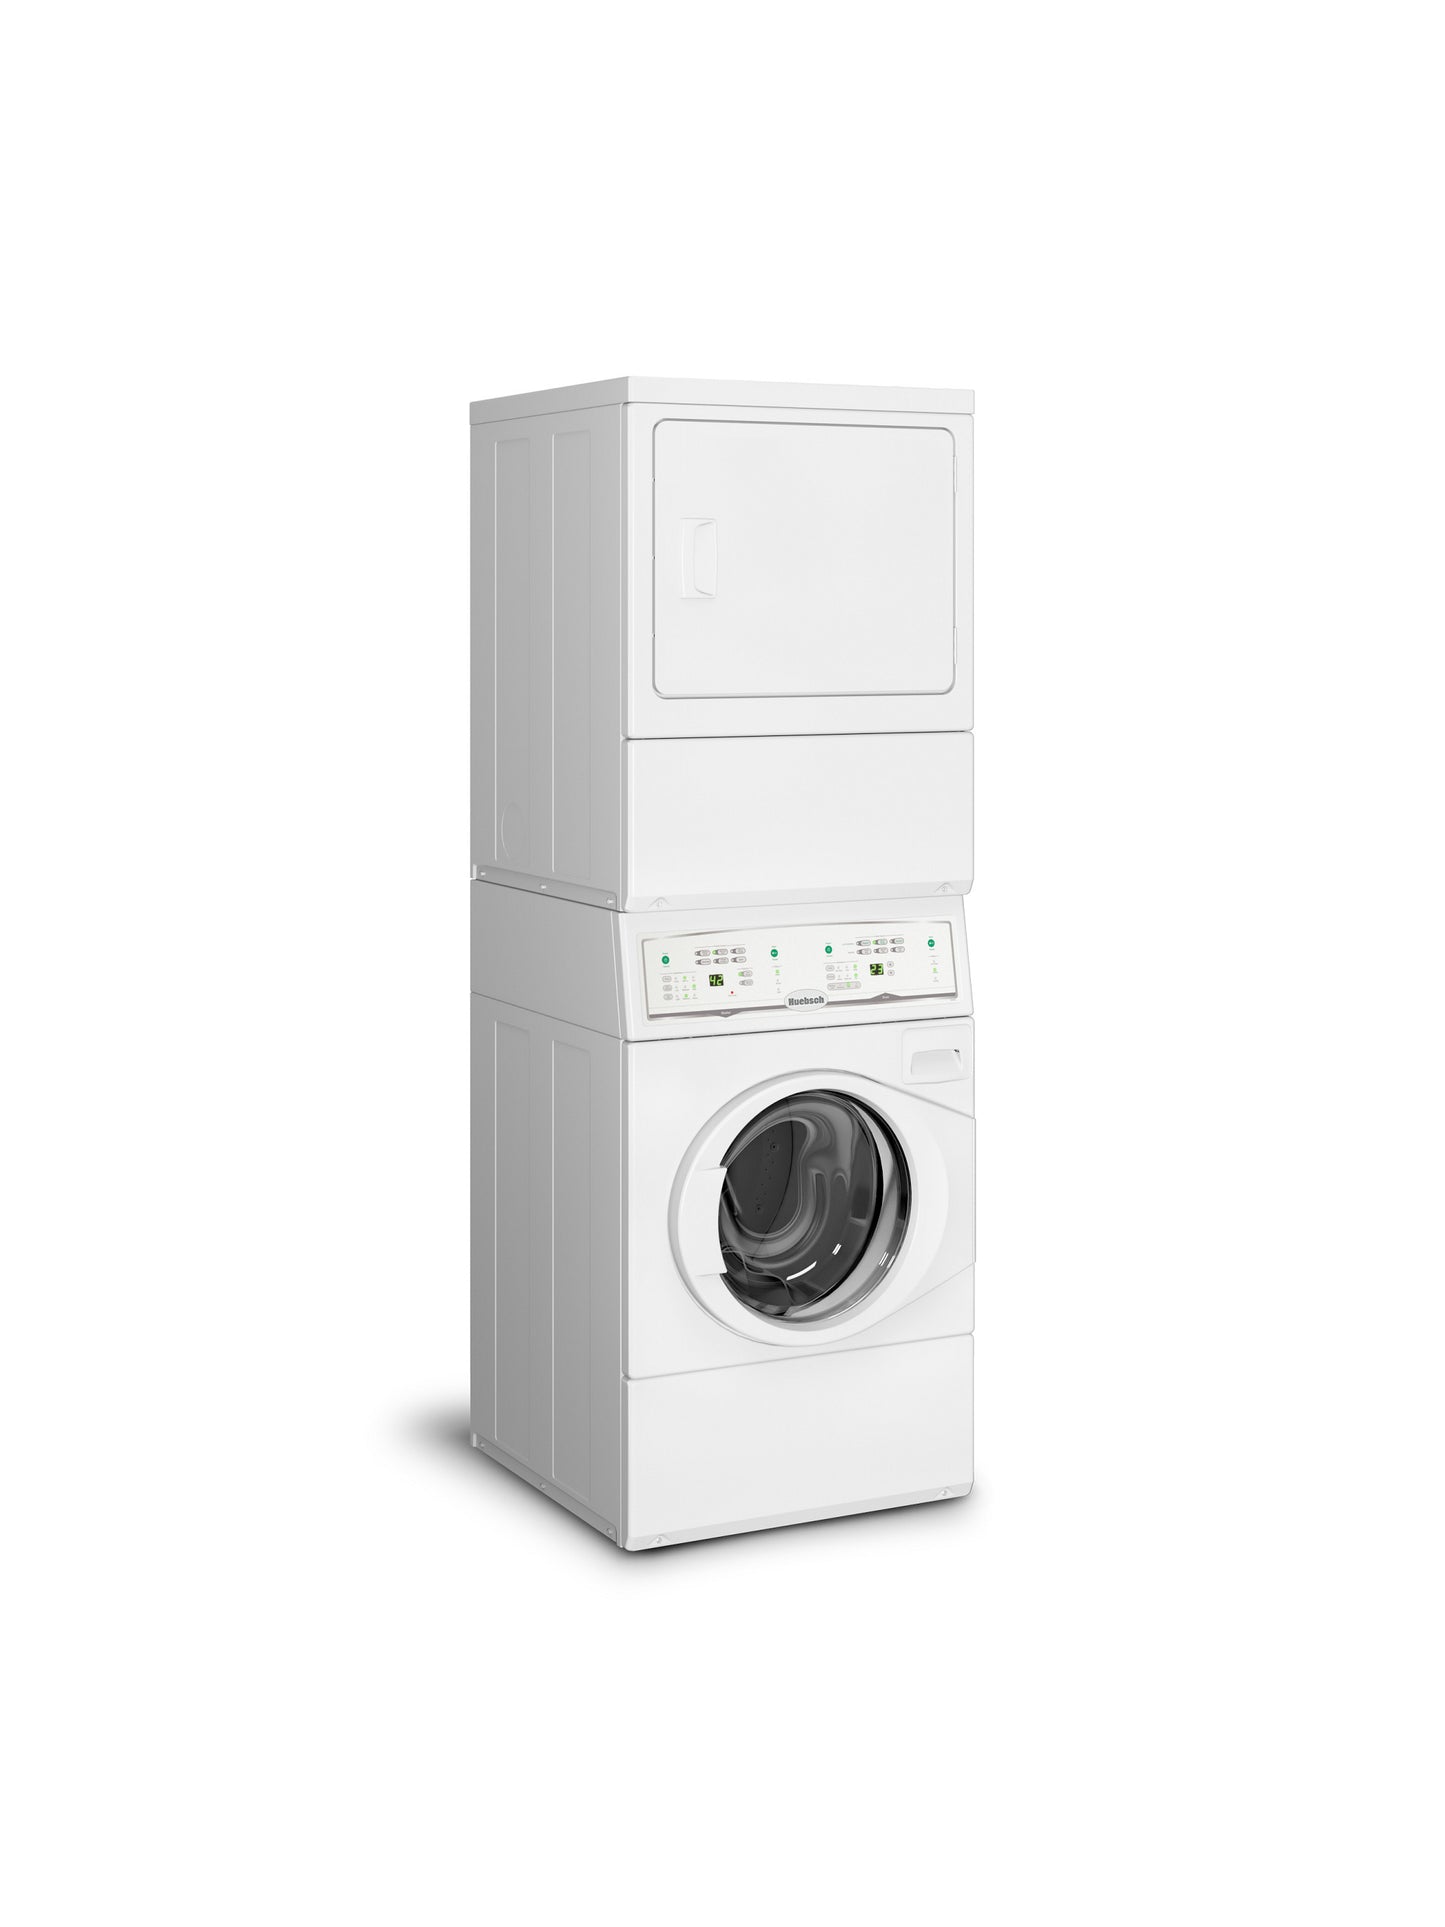 ON-PREMISE STACK WASHER/DRYER - ELECTRONIC